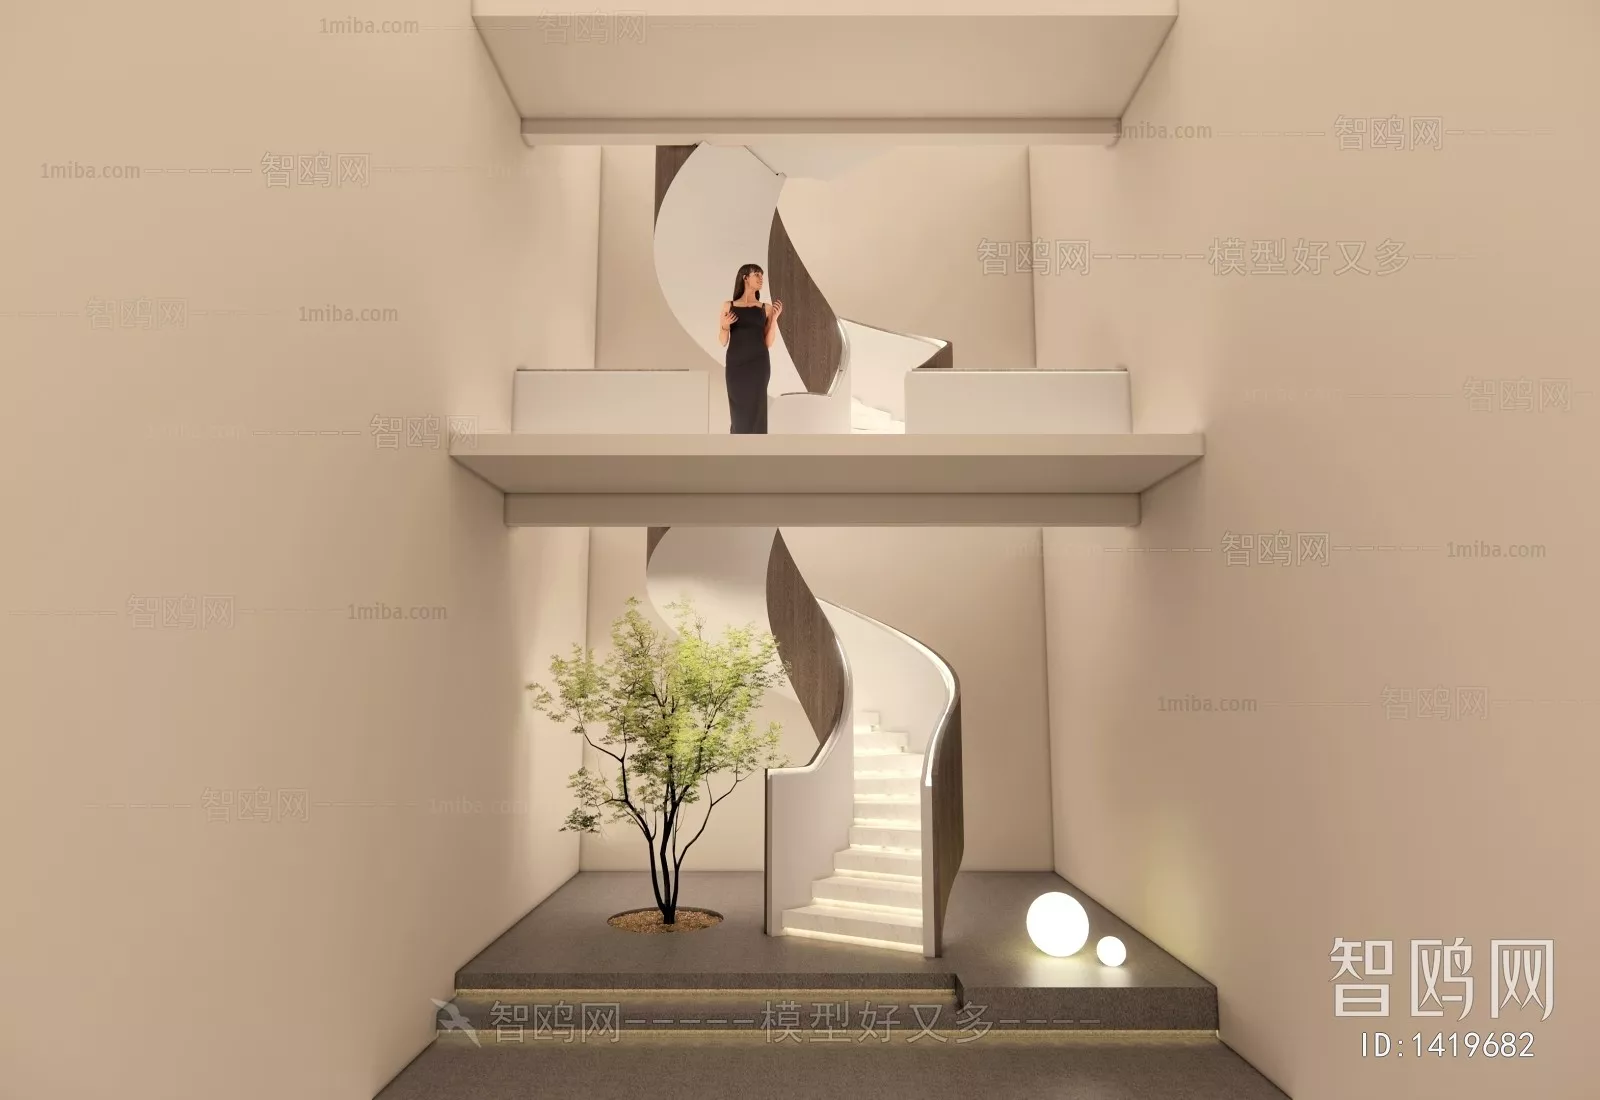 MODERN STAIR - SKETCHUP 3D MODEL - VRAY OR ENSCAPE - ID14307